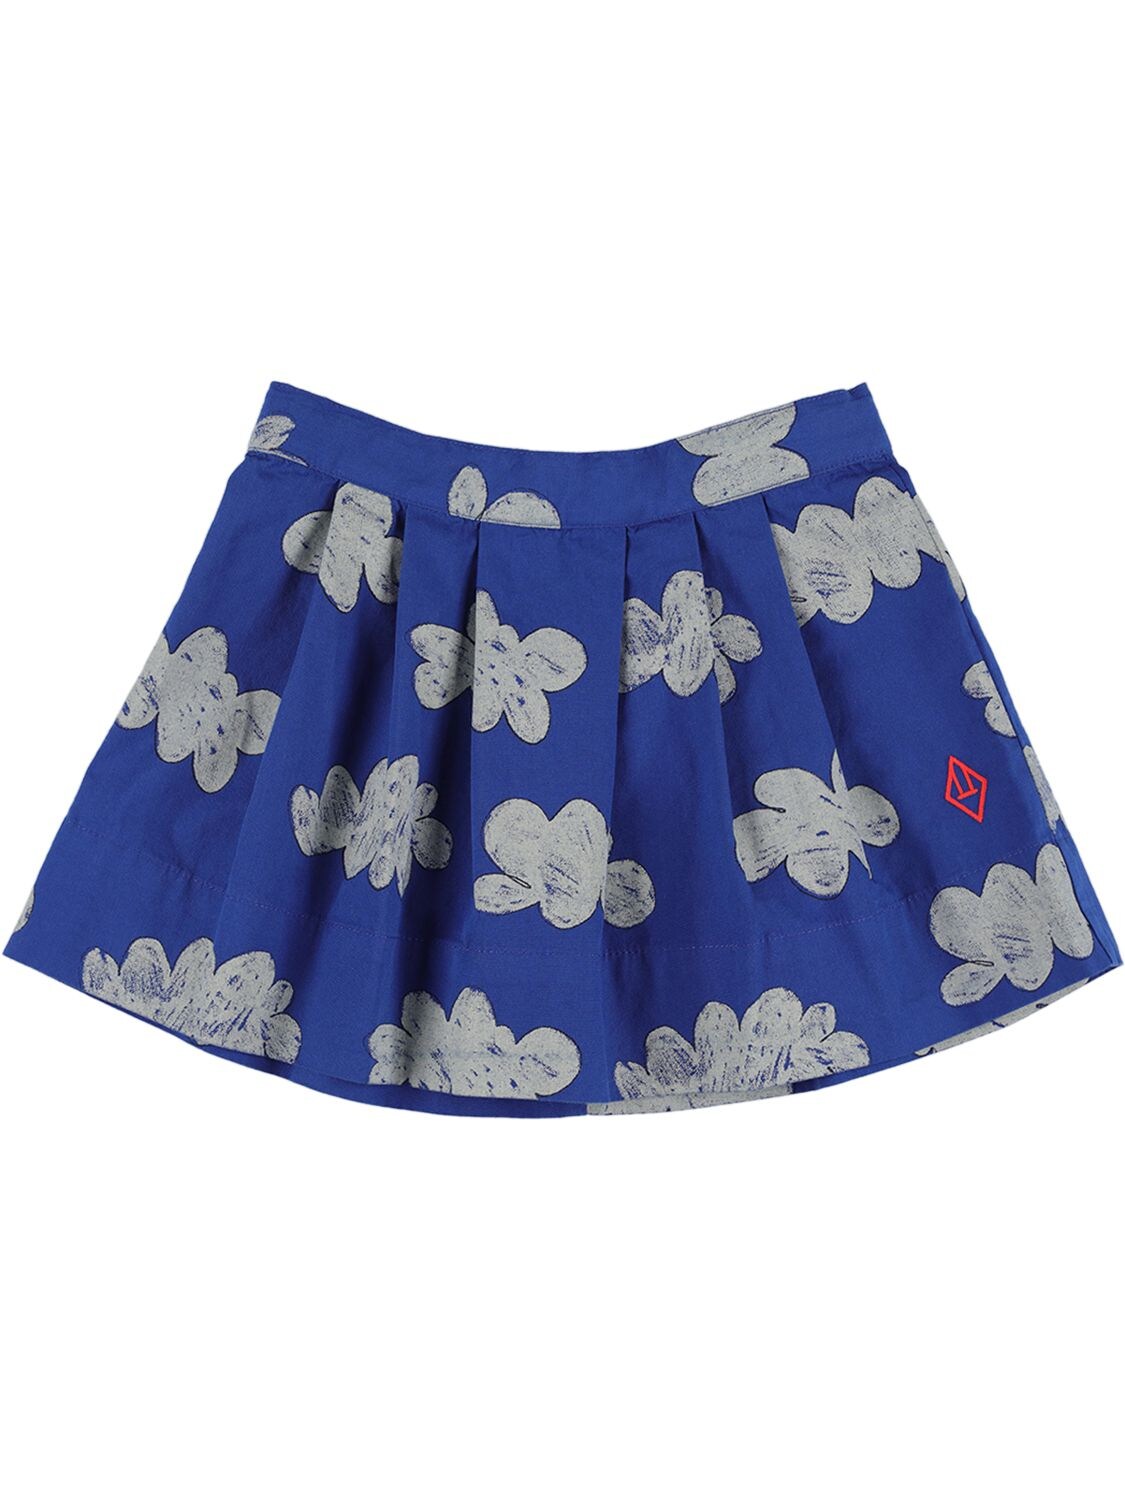 THE ANIMALS OBSERVATORY CLOUD PRINT PLEATED SKIRT